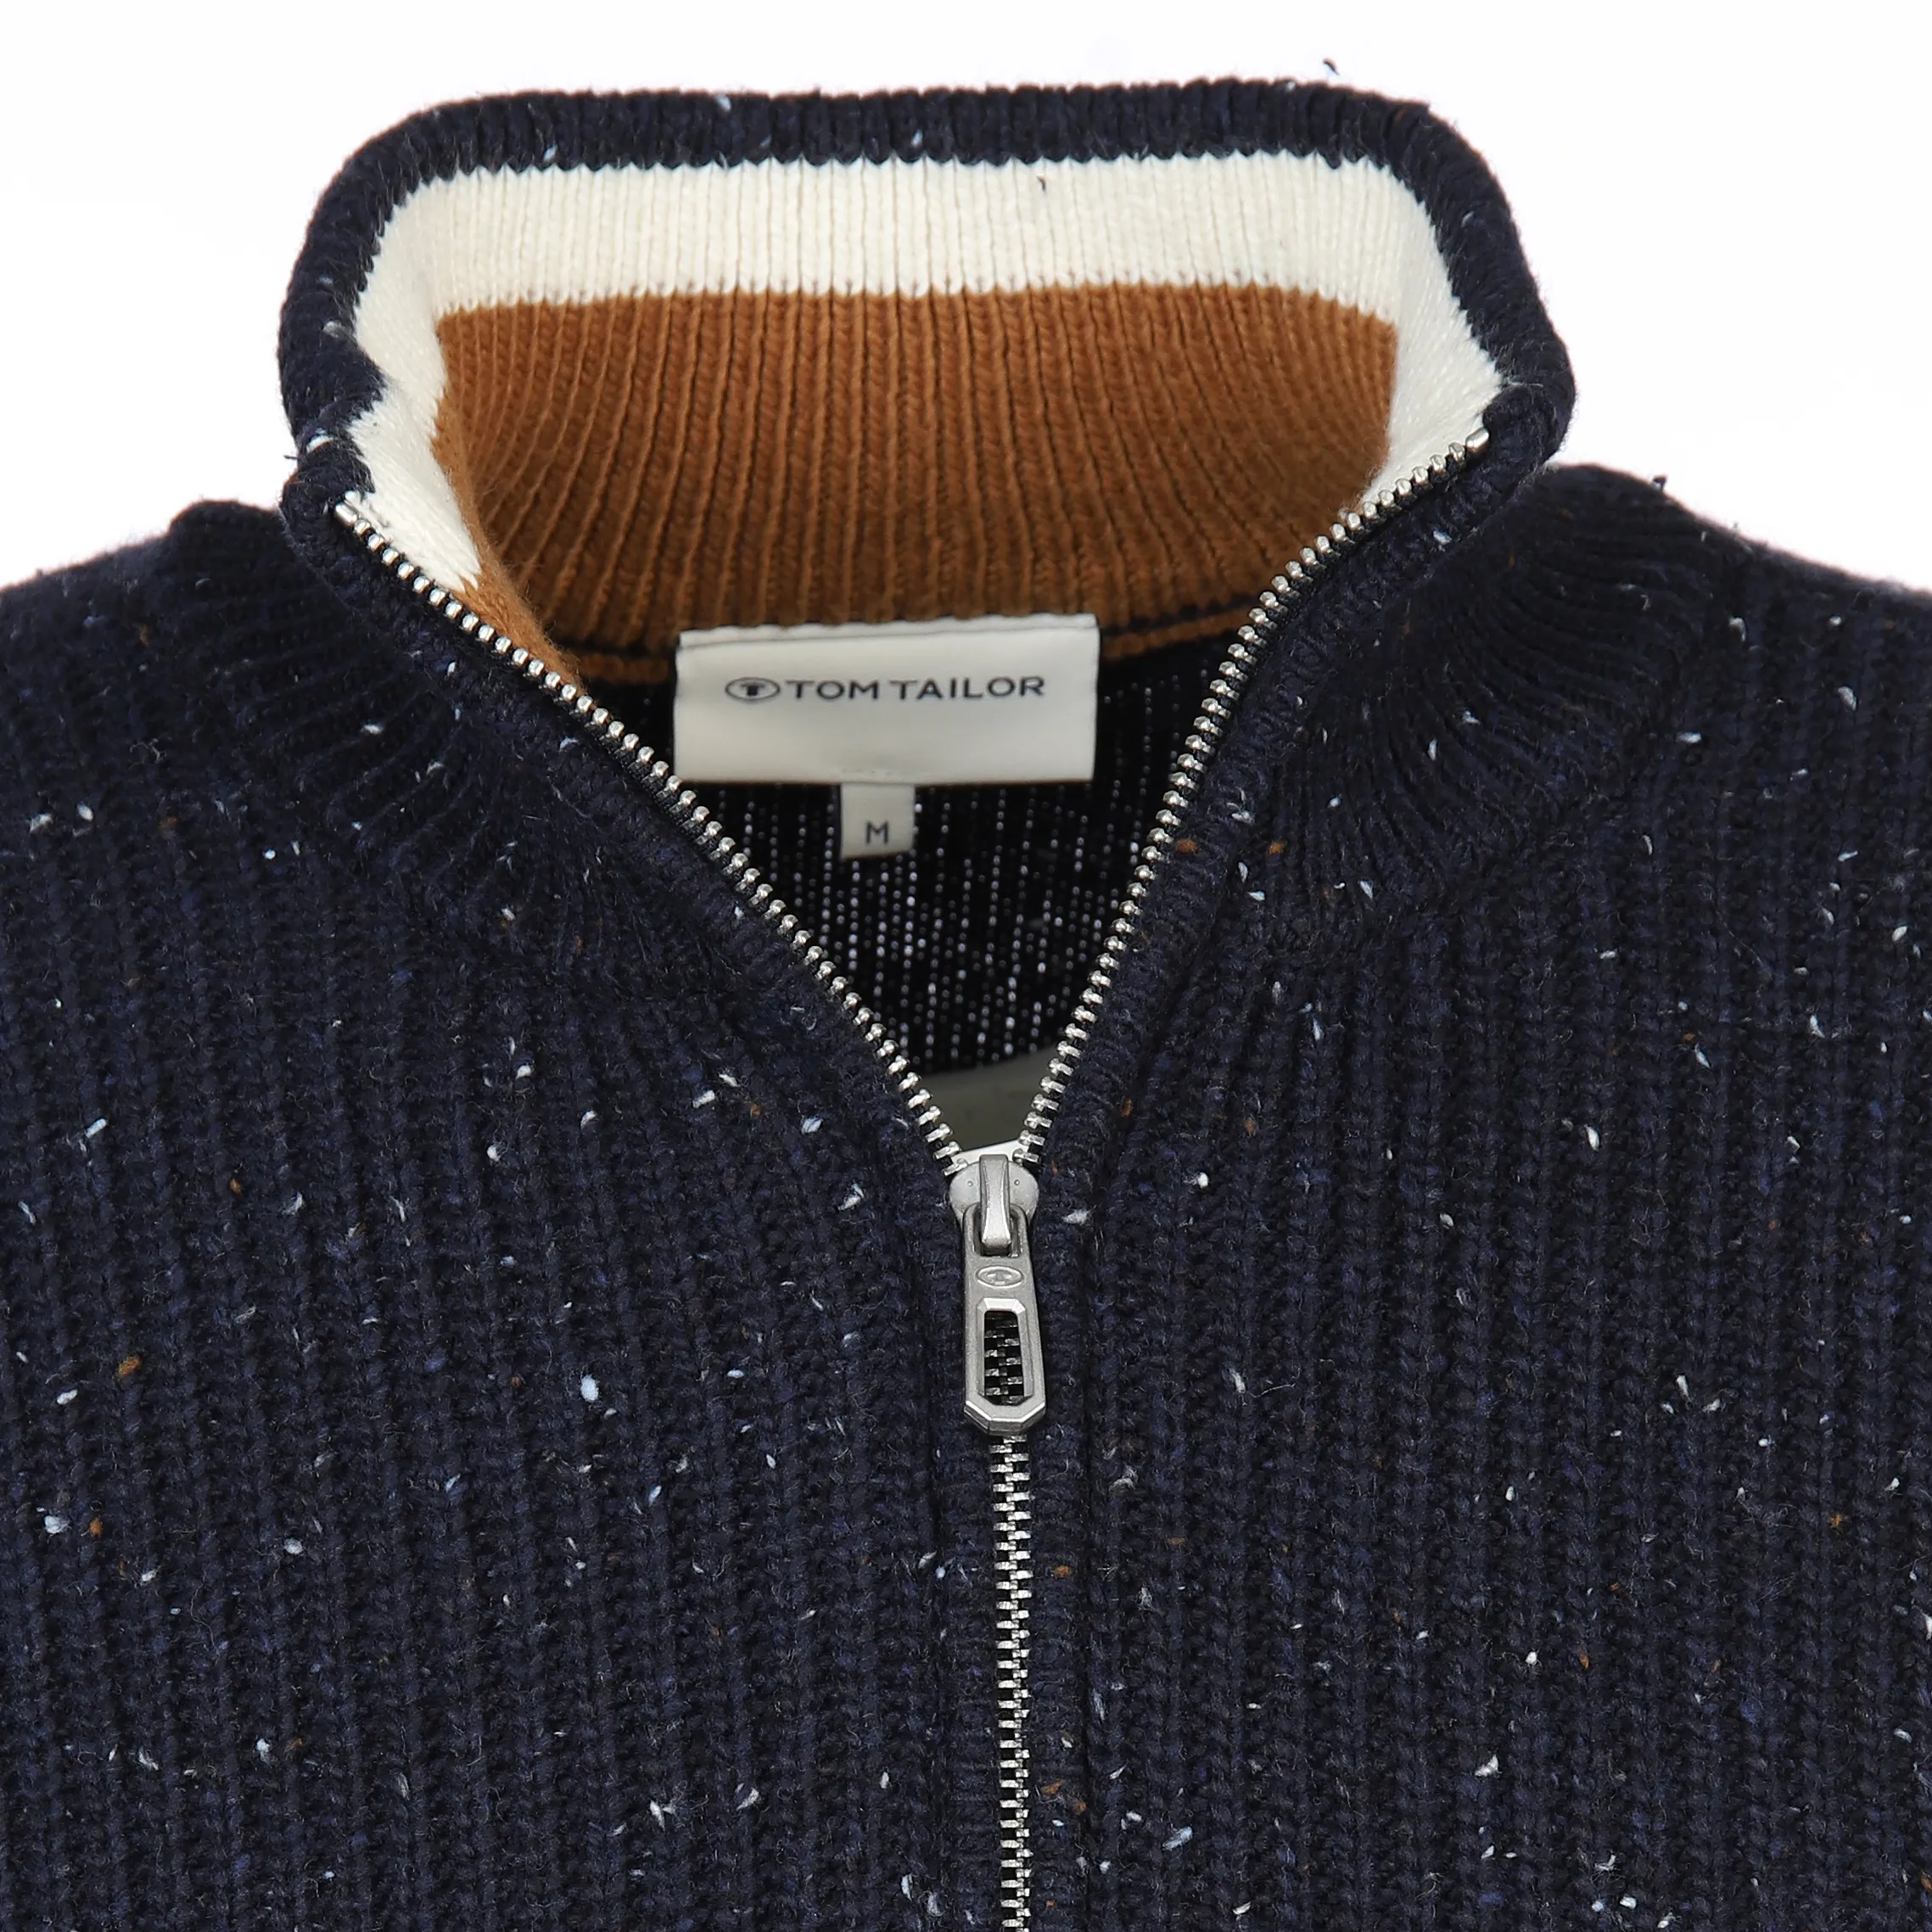 Tom Tailor 1039673 nep structured knit tr Marine 887473 34146 3